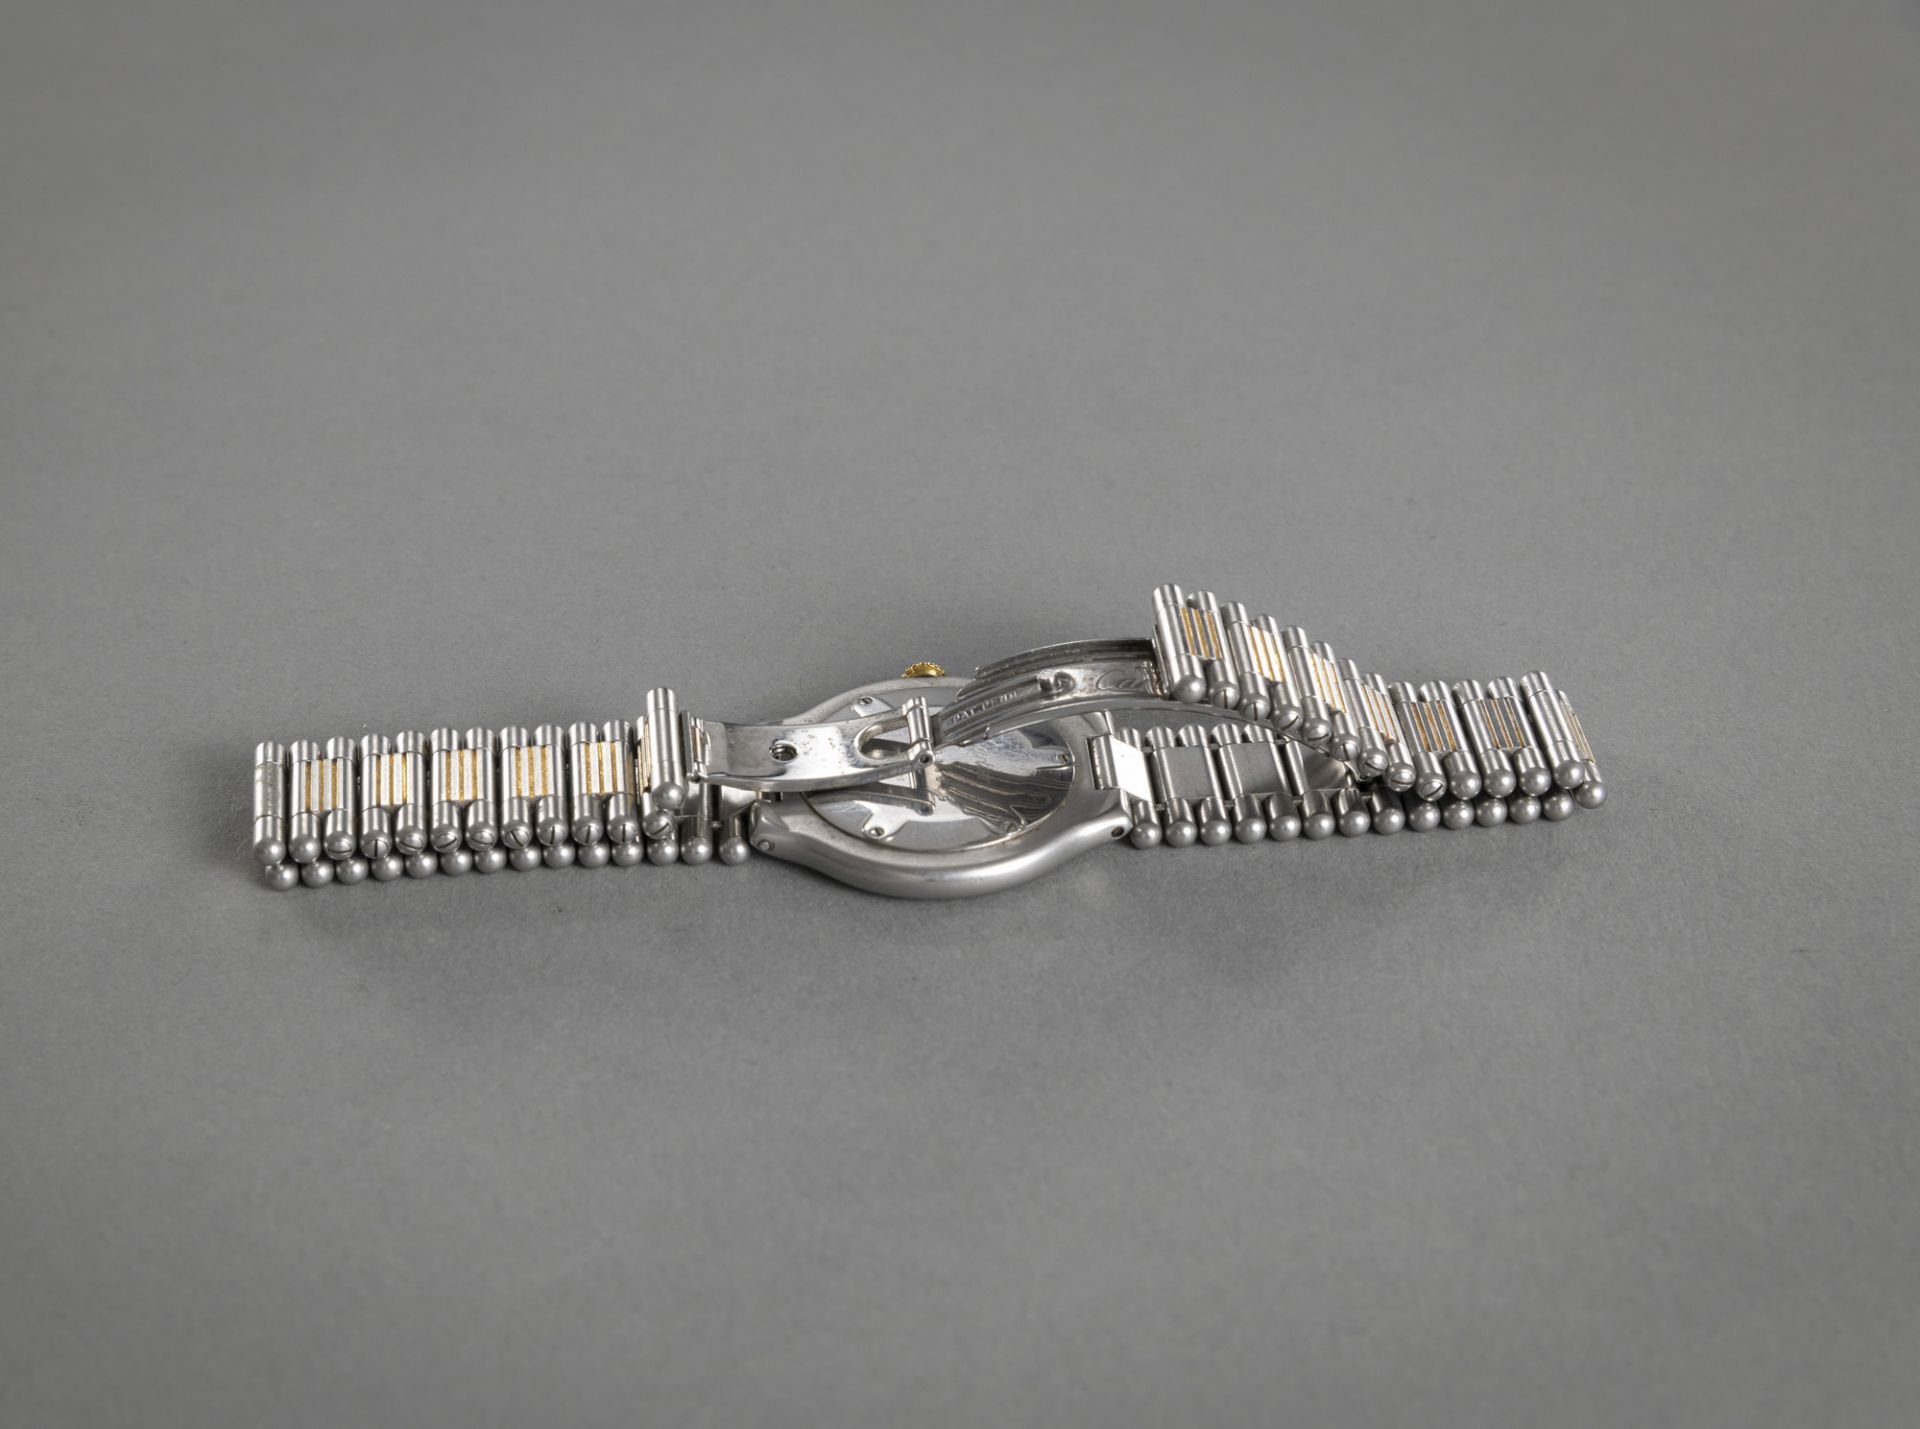 A WIRST WATCH - Image 6 of 7